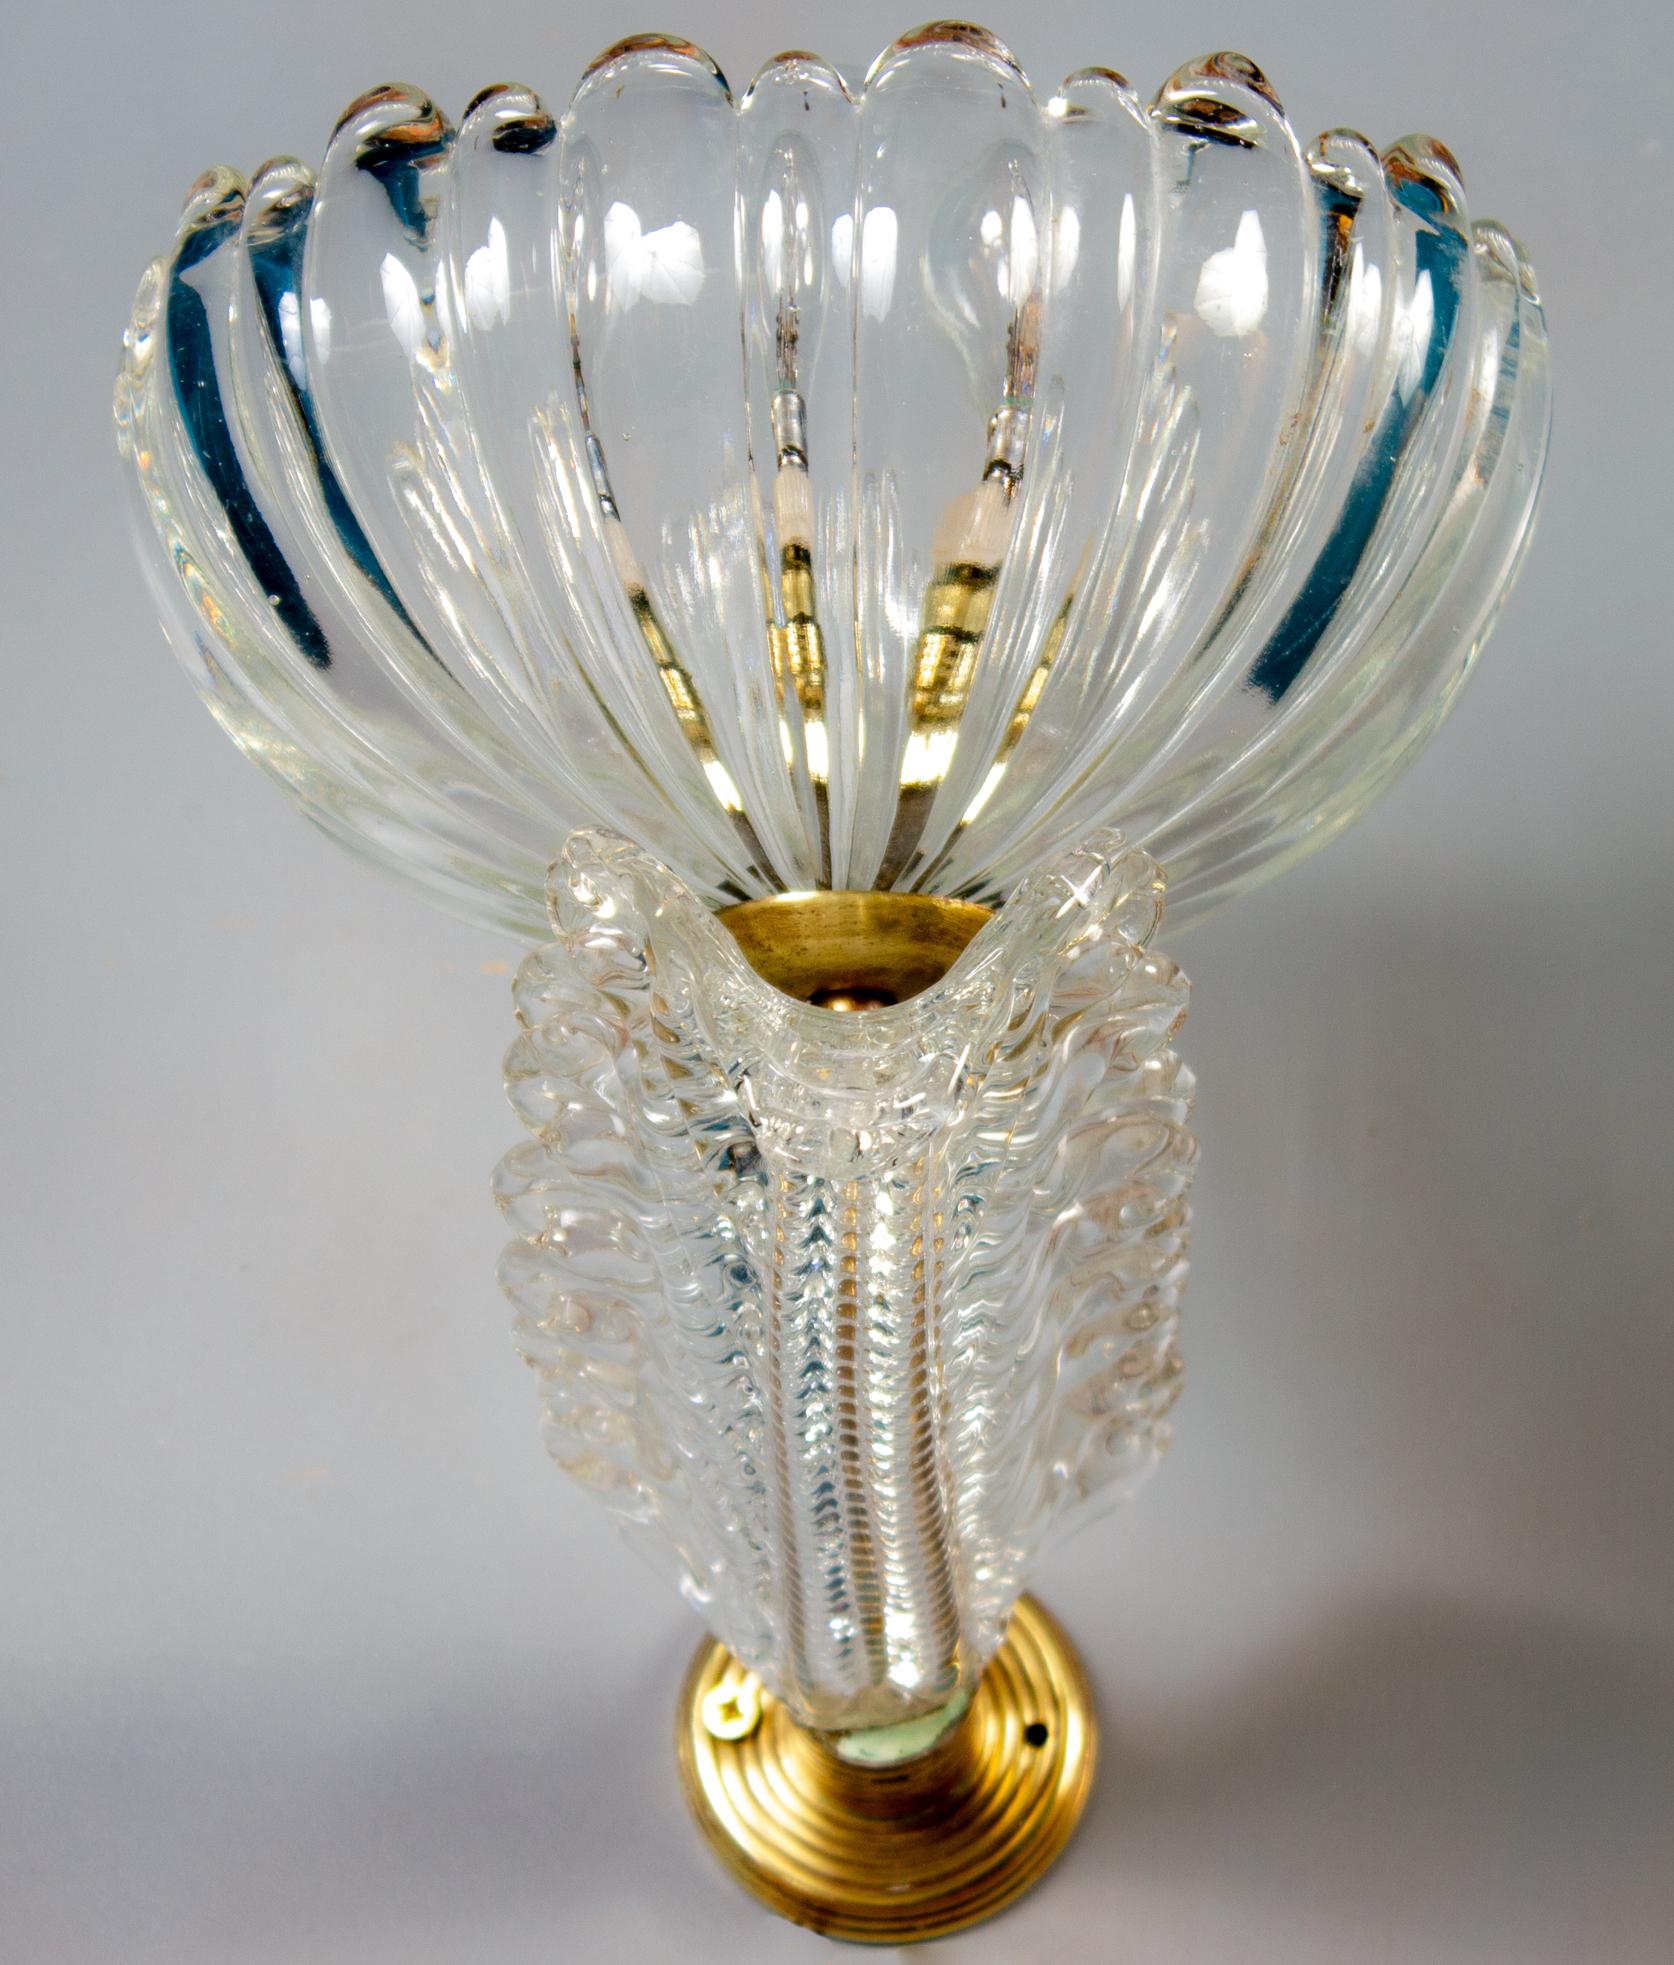 A rare set of eight Barovier Art Deco brass mounted Murano glass sconces or wall lights wit a precious hand blown Murano glass cup.
We can sell also a pair.
Each with 1 E 14 light bulb.